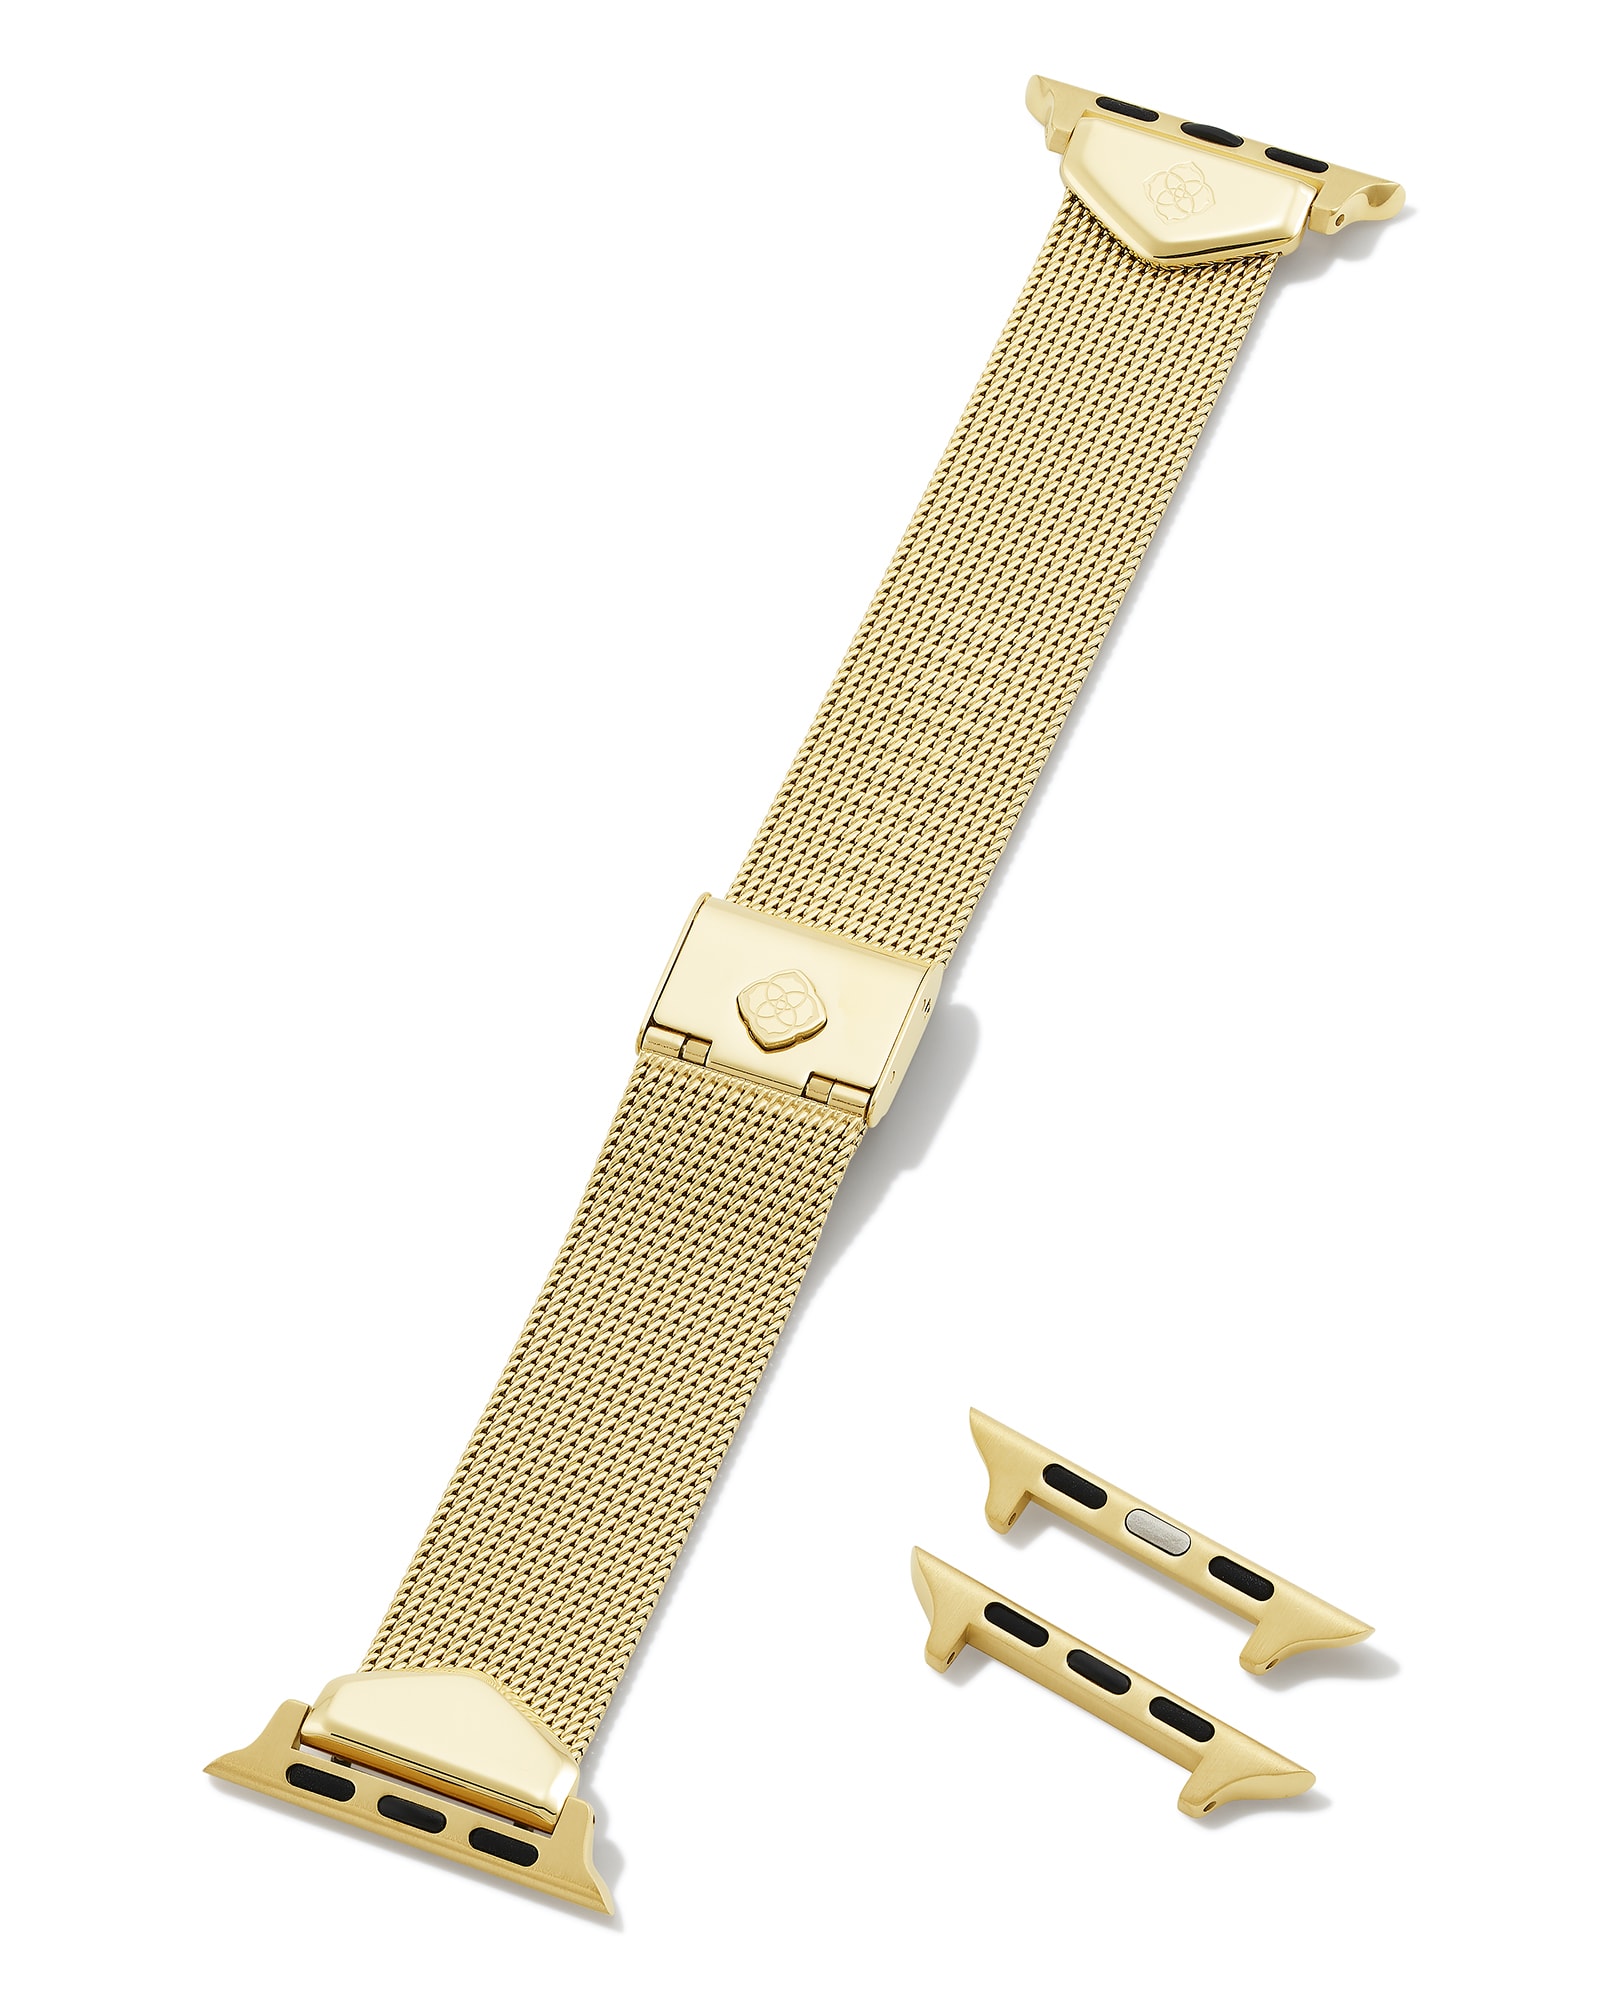 Mia Mesh Watch Band in Gold Tone Stainless Steel